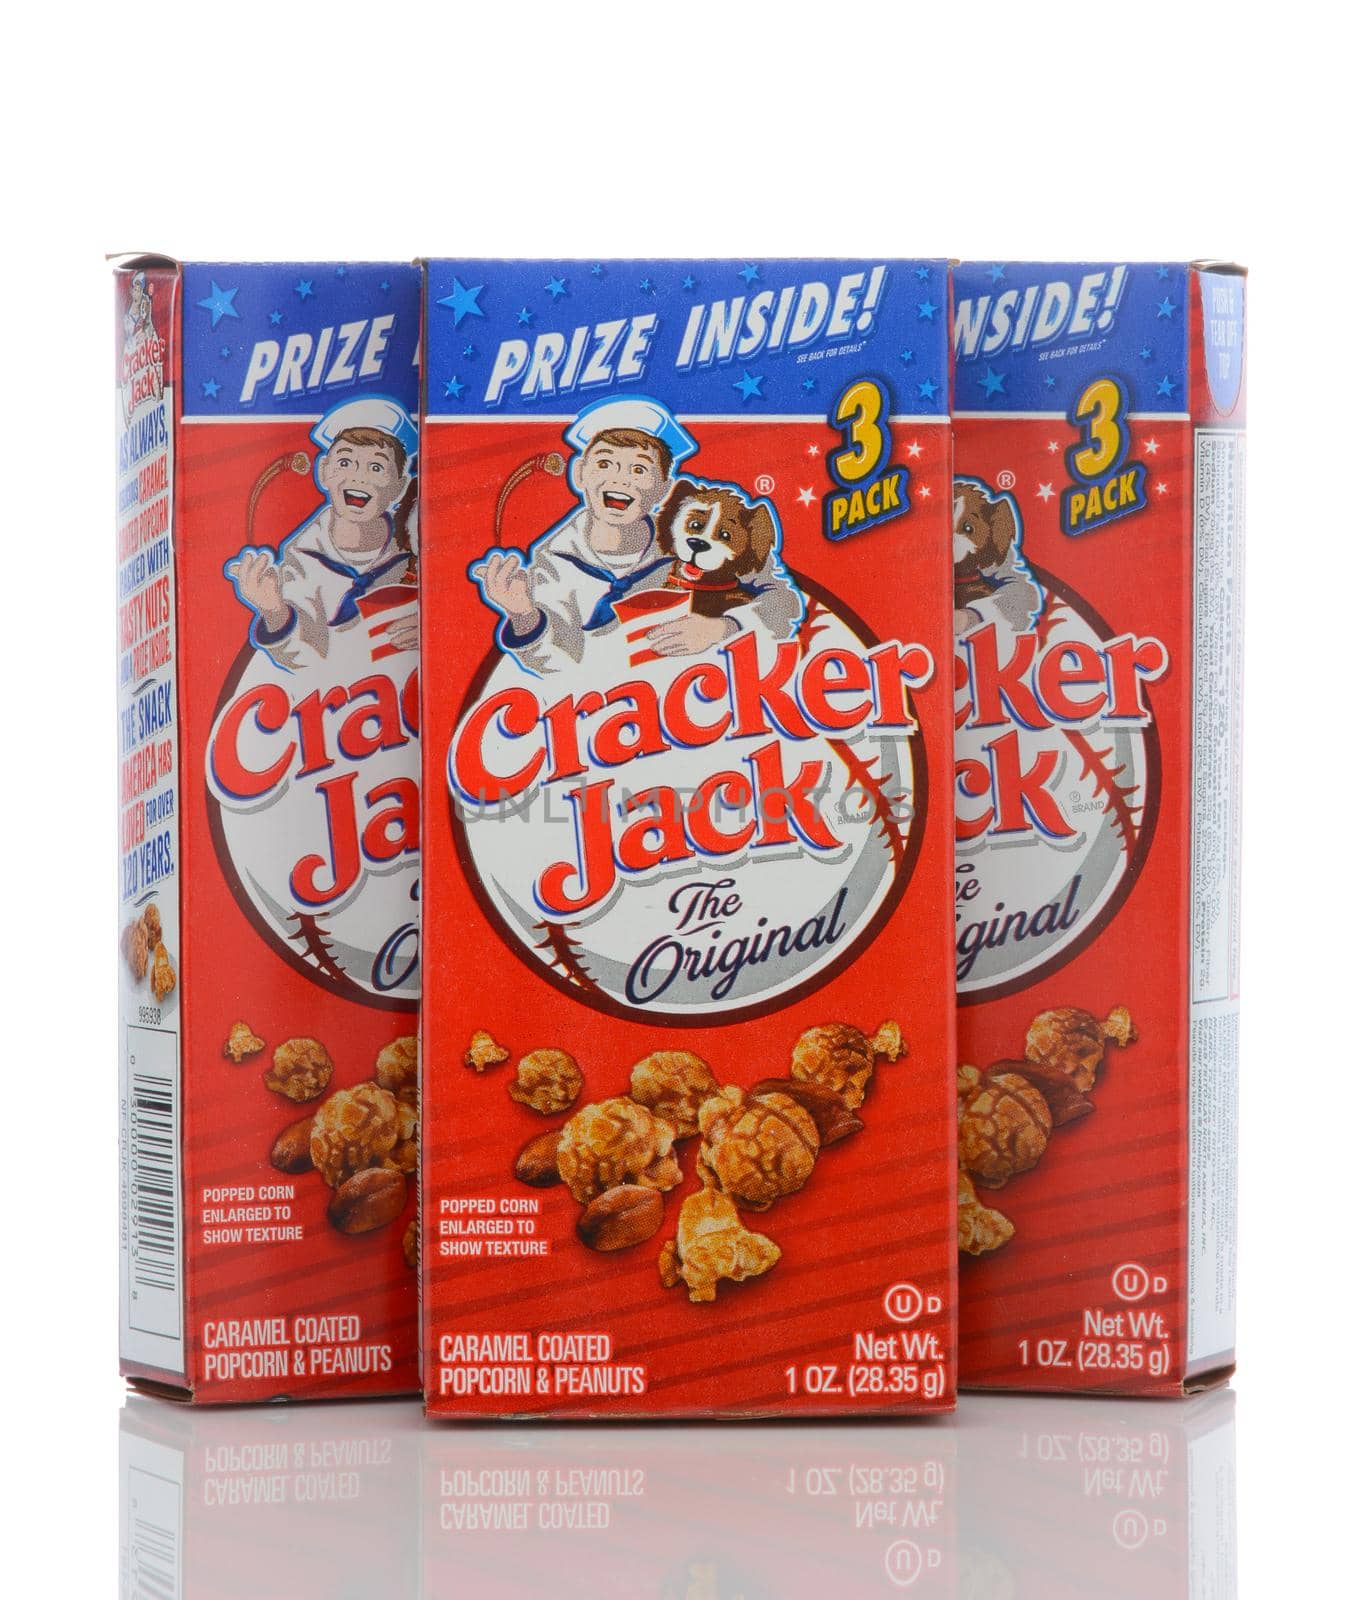 IRVINE, CALIFORNIA - MAY 23, 2019:  Three boxes of Cracker Jack. The brand registered in 1896, is a snack consisting of molasses flavored, candy coated, popcorn and peanuts.